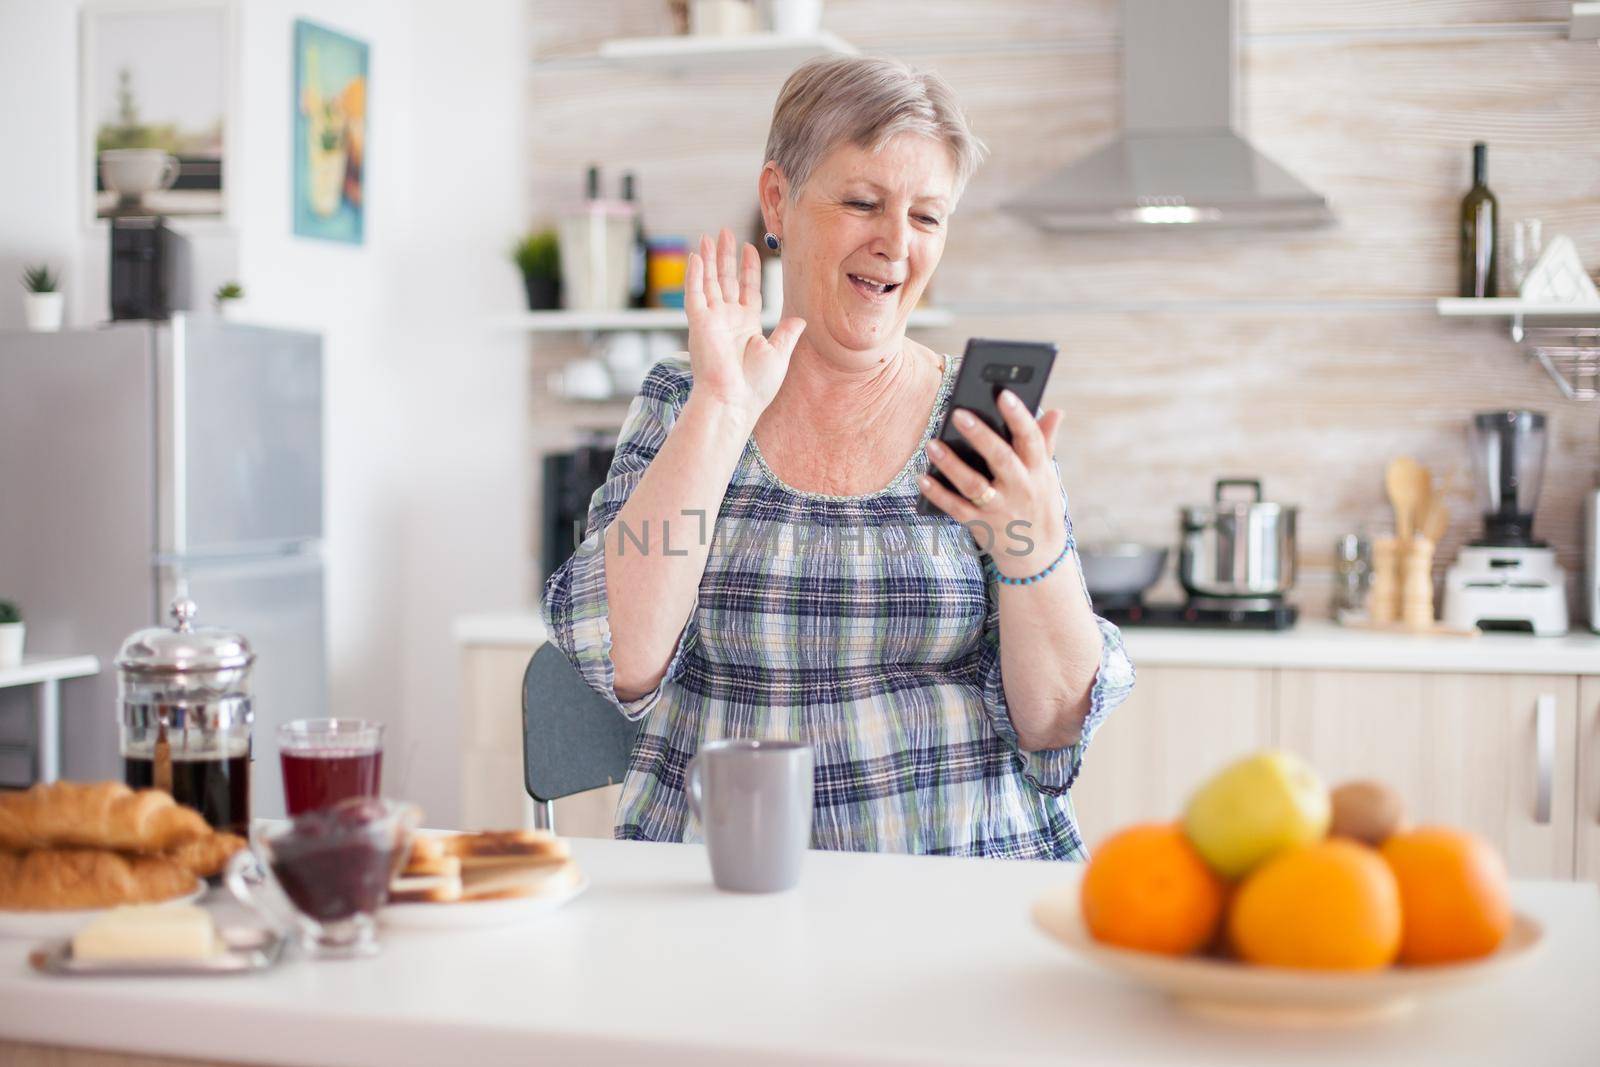 Senior woman waving during video conference using smartphone in kitchen while having breaksfat. Elderly person using internet online chat technology video webcam making a video call connection camera communication conference call